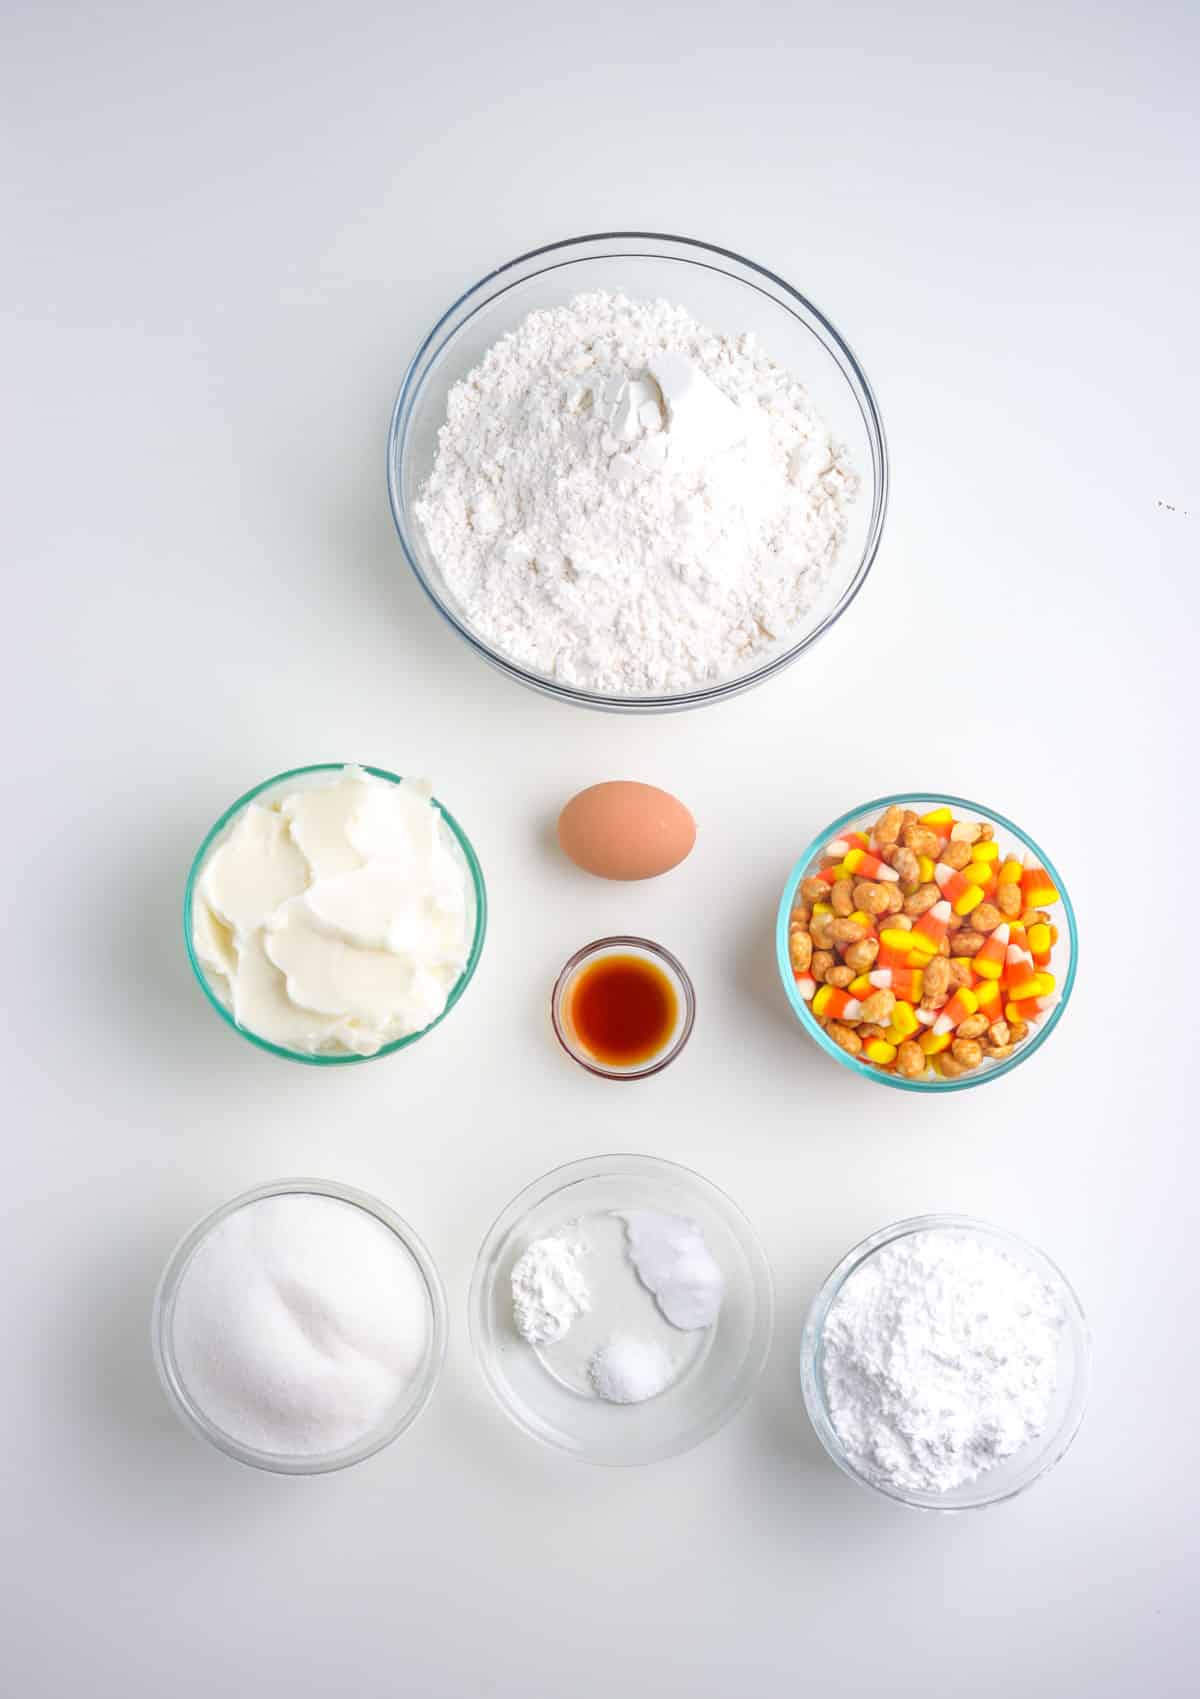 A picture of the ingredients needed to make this recipe.